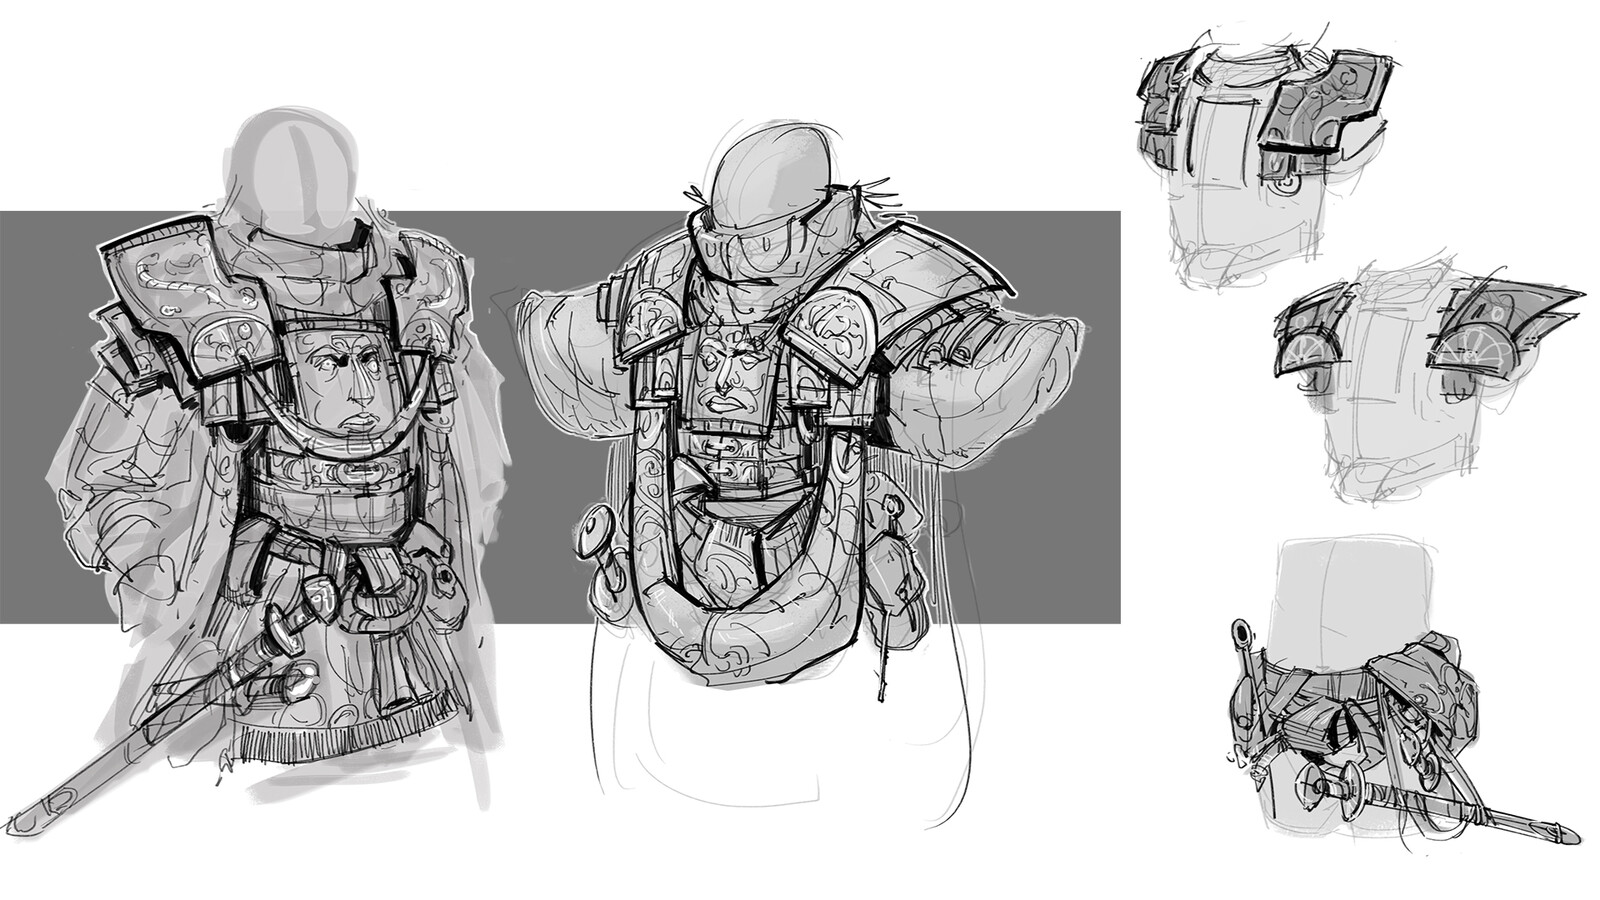 Different variations for the final armor. It ended up being some kind of mix of these two.